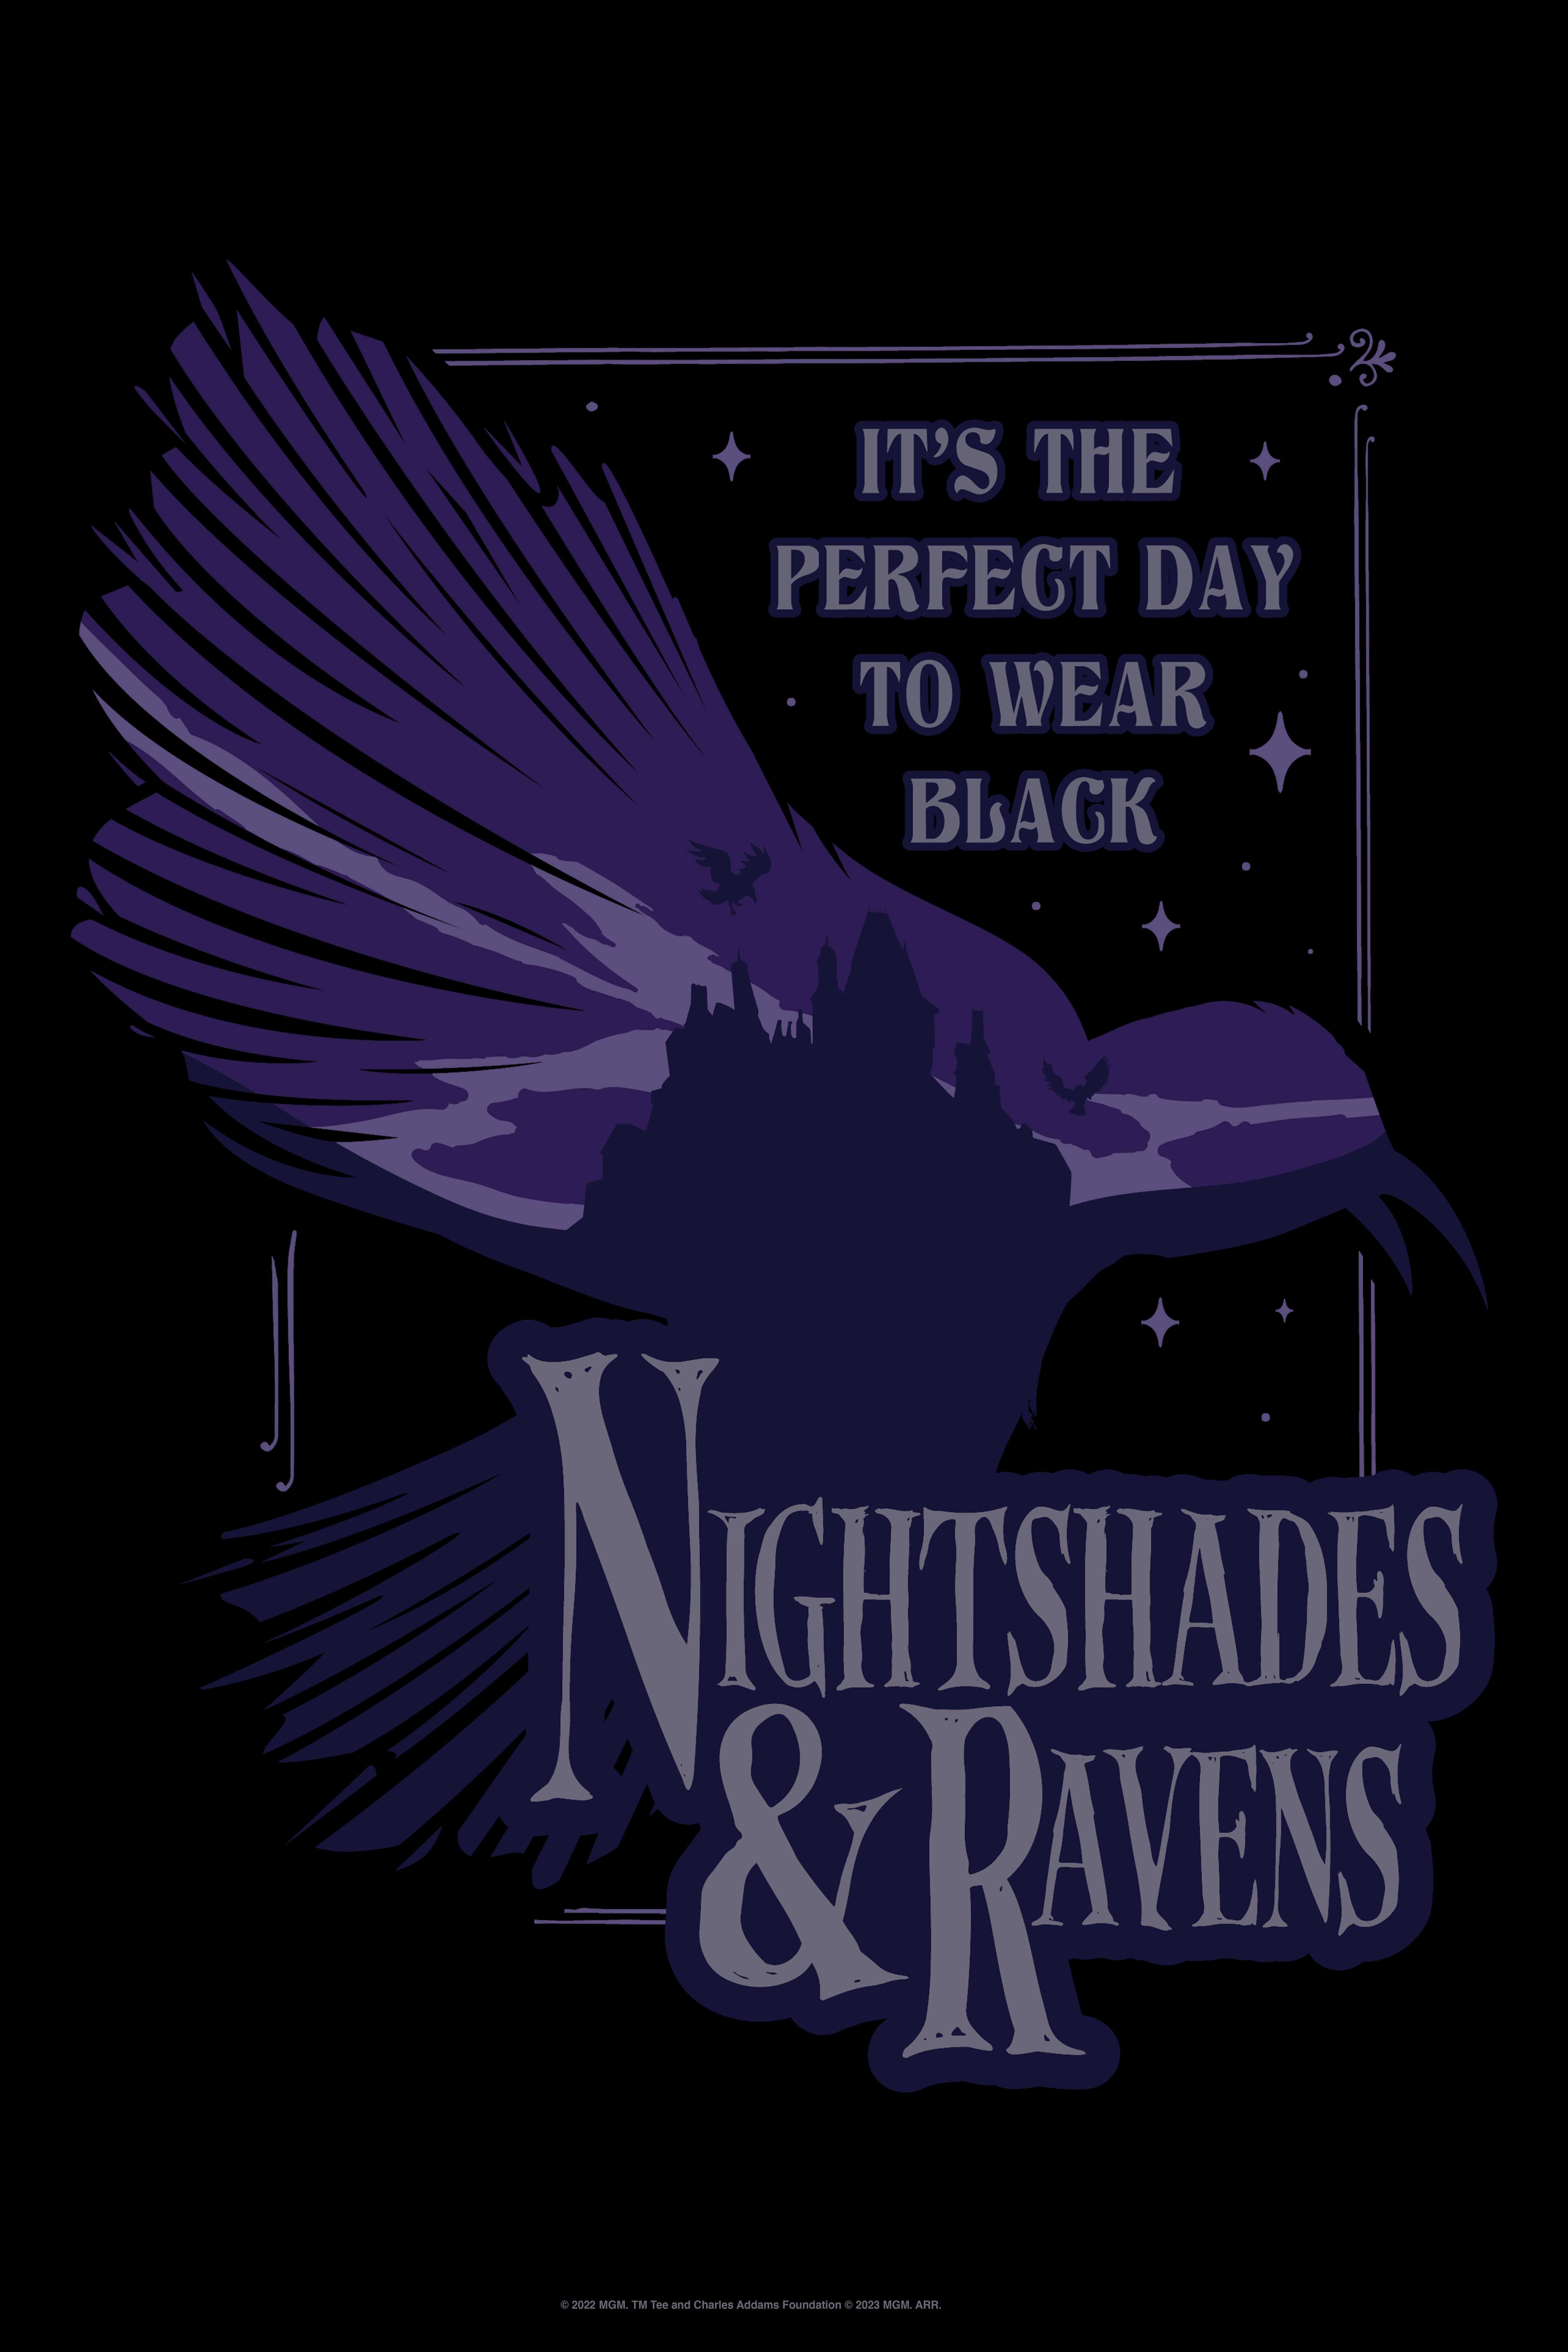 Wednesday Nightshades And Ravens Poster, , hi-res